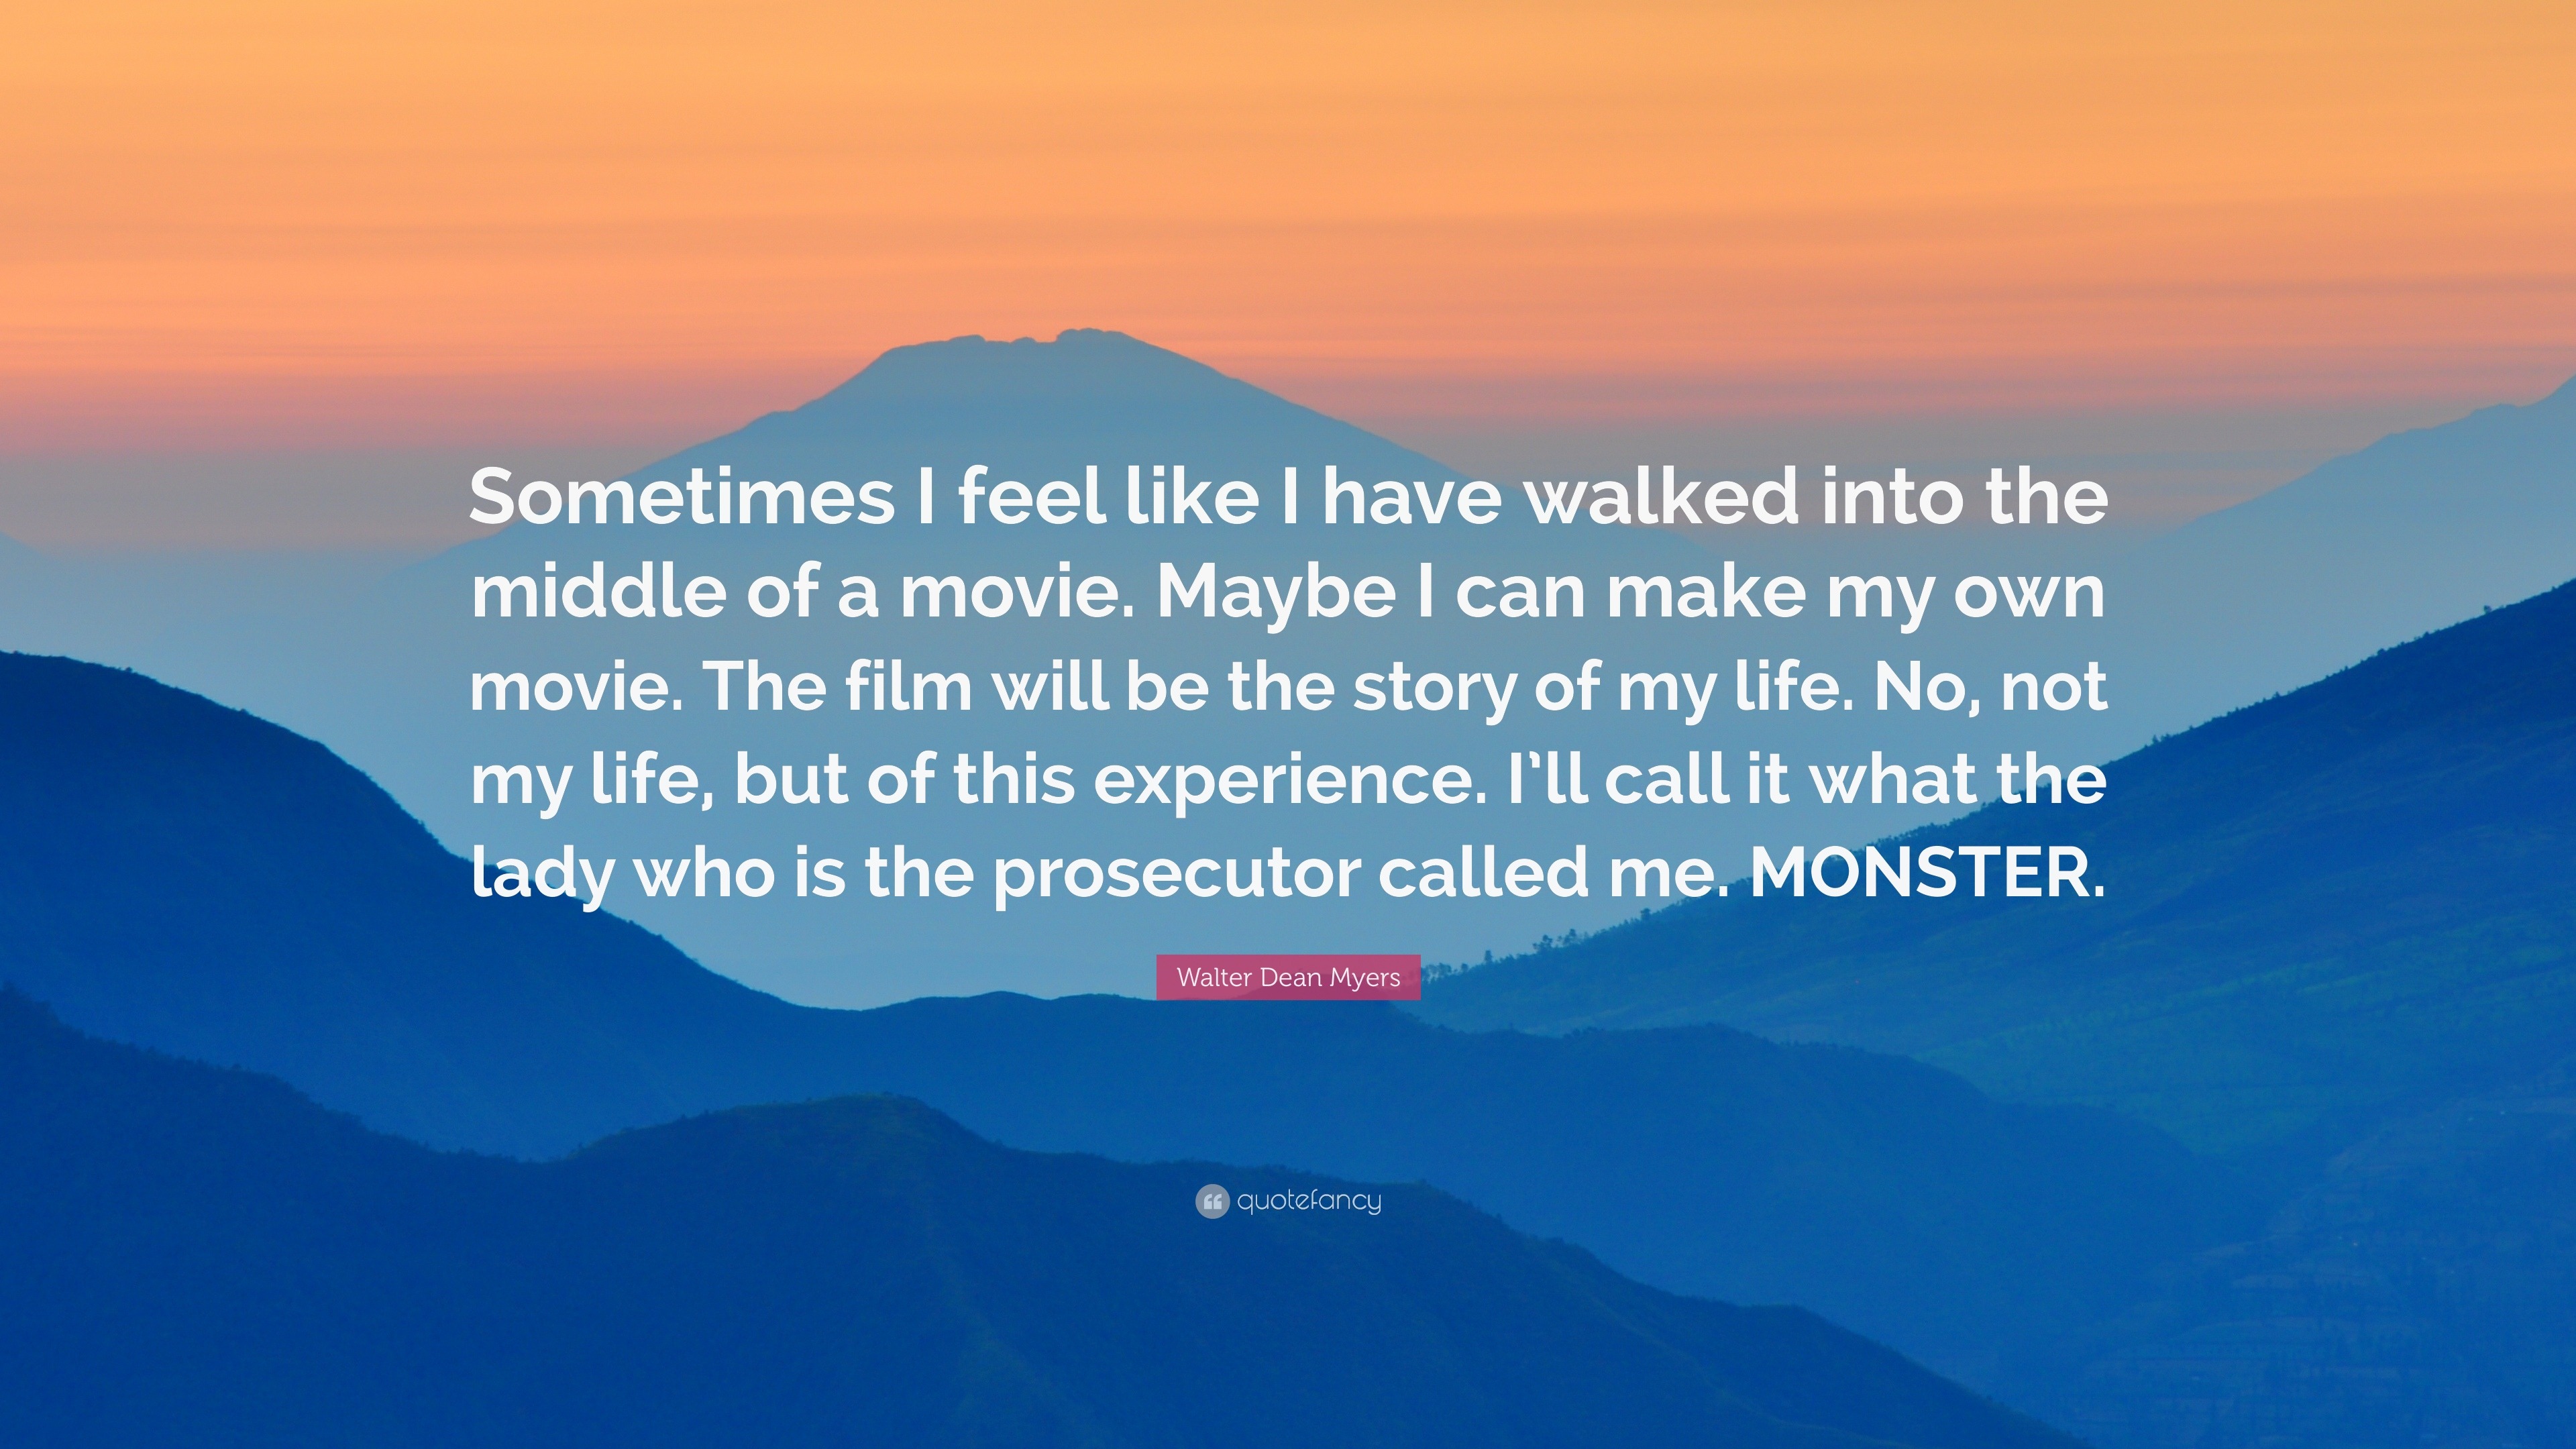 Walter Dean Myers Quote Sometimes I Feel Like I Have Walked Into The Middle Of A Movie Maybe I Can Make My Own Movie The Film Will Be The Stor